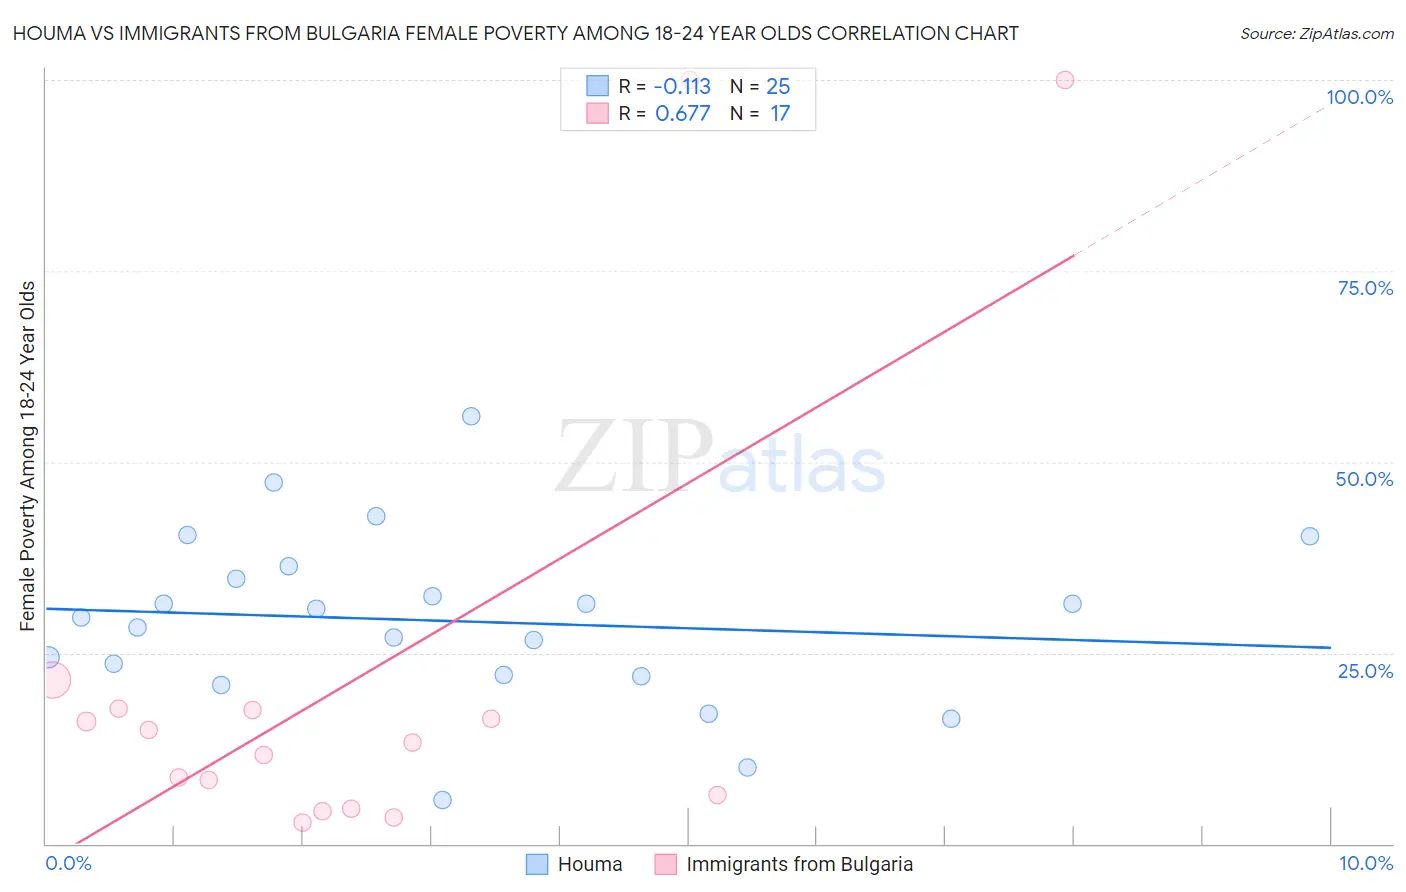 Houma vs Immigrants from Bulgaria Female Poverty Among 18-24 Year Olds